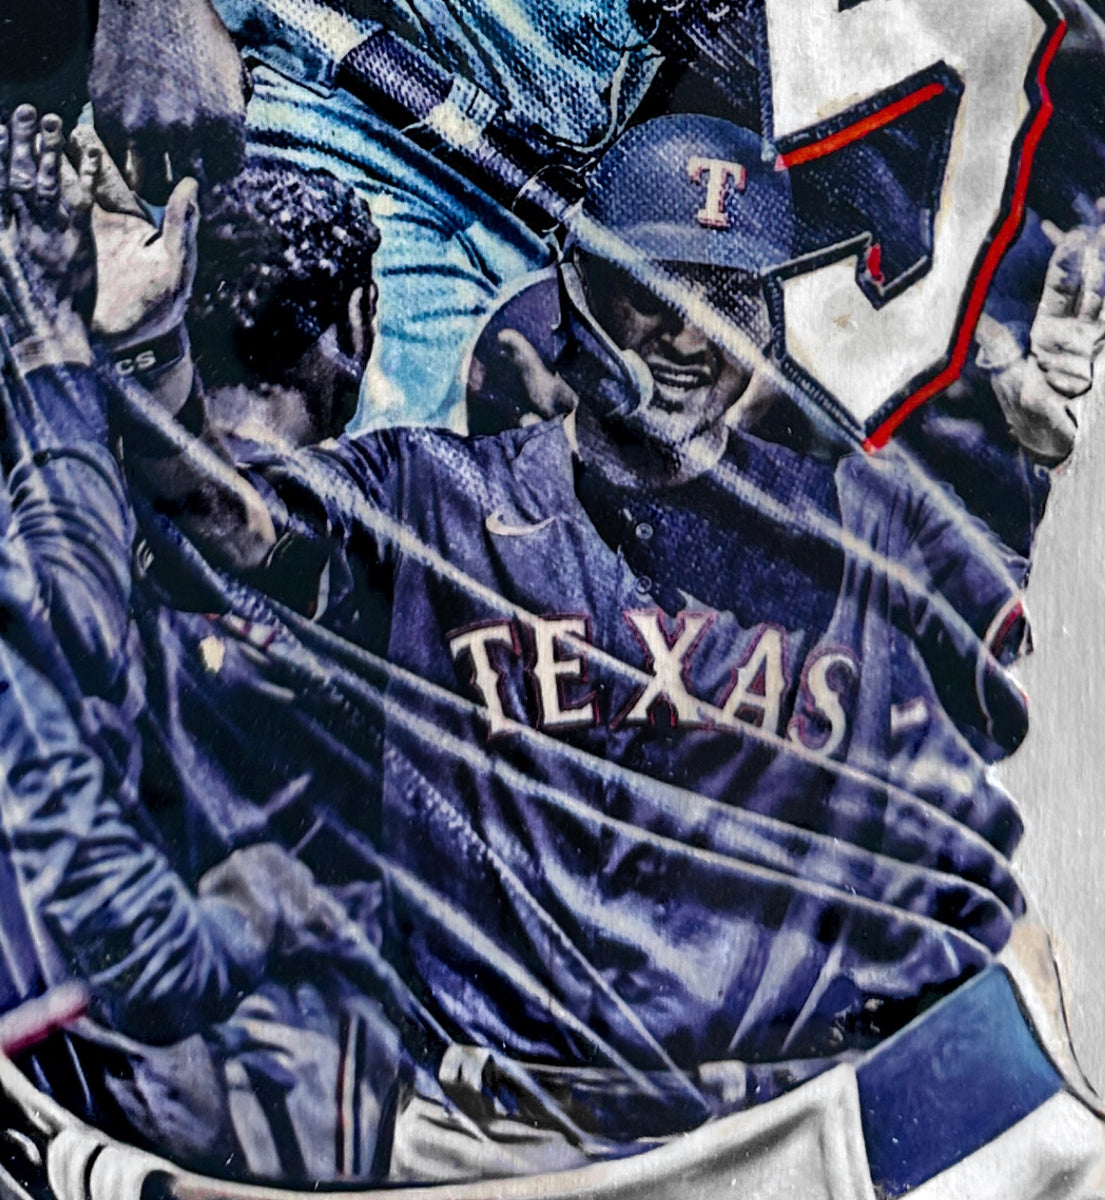 Texas Rangers Lithograph print of Corey Seager 2022 11 x 14